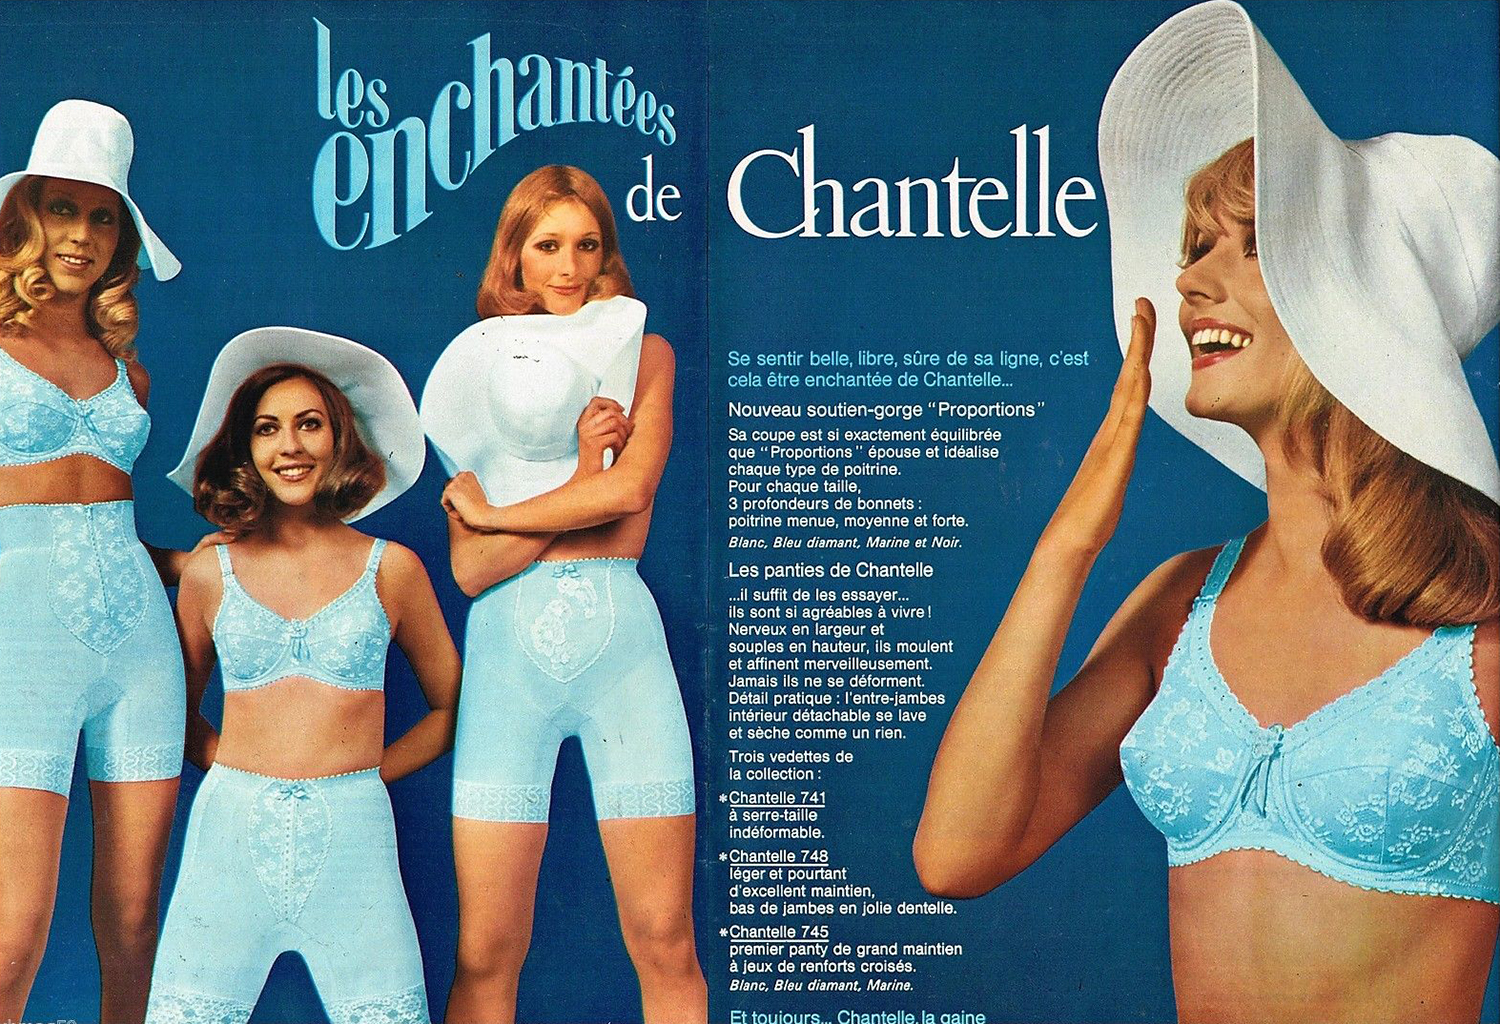 Obsession (Lingerie) 1969 Bra, Panty — Advertisement